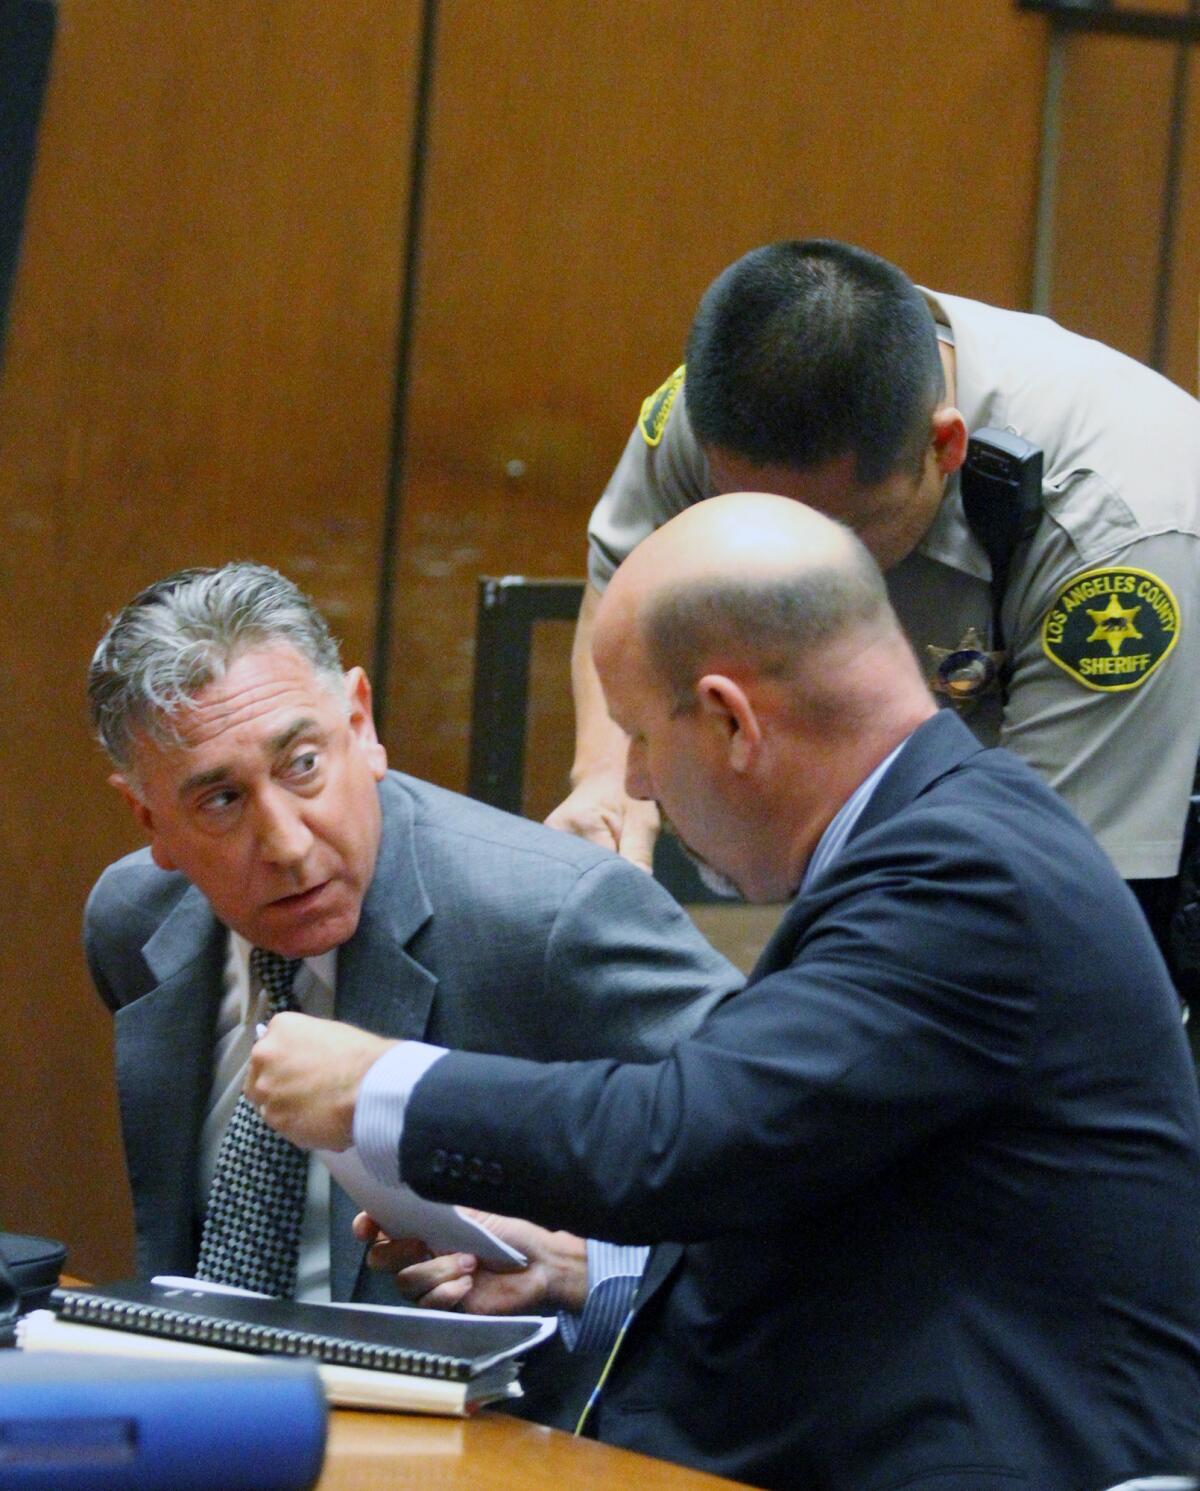 Former Glendale Mayor John Drayman, after being sentenced, is put in handcuffs by a Los Angeles County Sheriff's deputy with his lawyer Sean McDonald at his side at Superior Court in Los Angeles on Monday, April 7, 2014 for embezzling proceeds from the Montrose Farmer's Market, and filing false tax returns. After spending eight days in jail, Drayman was transferred to home confinement, with his sentence due to end this Sunday.